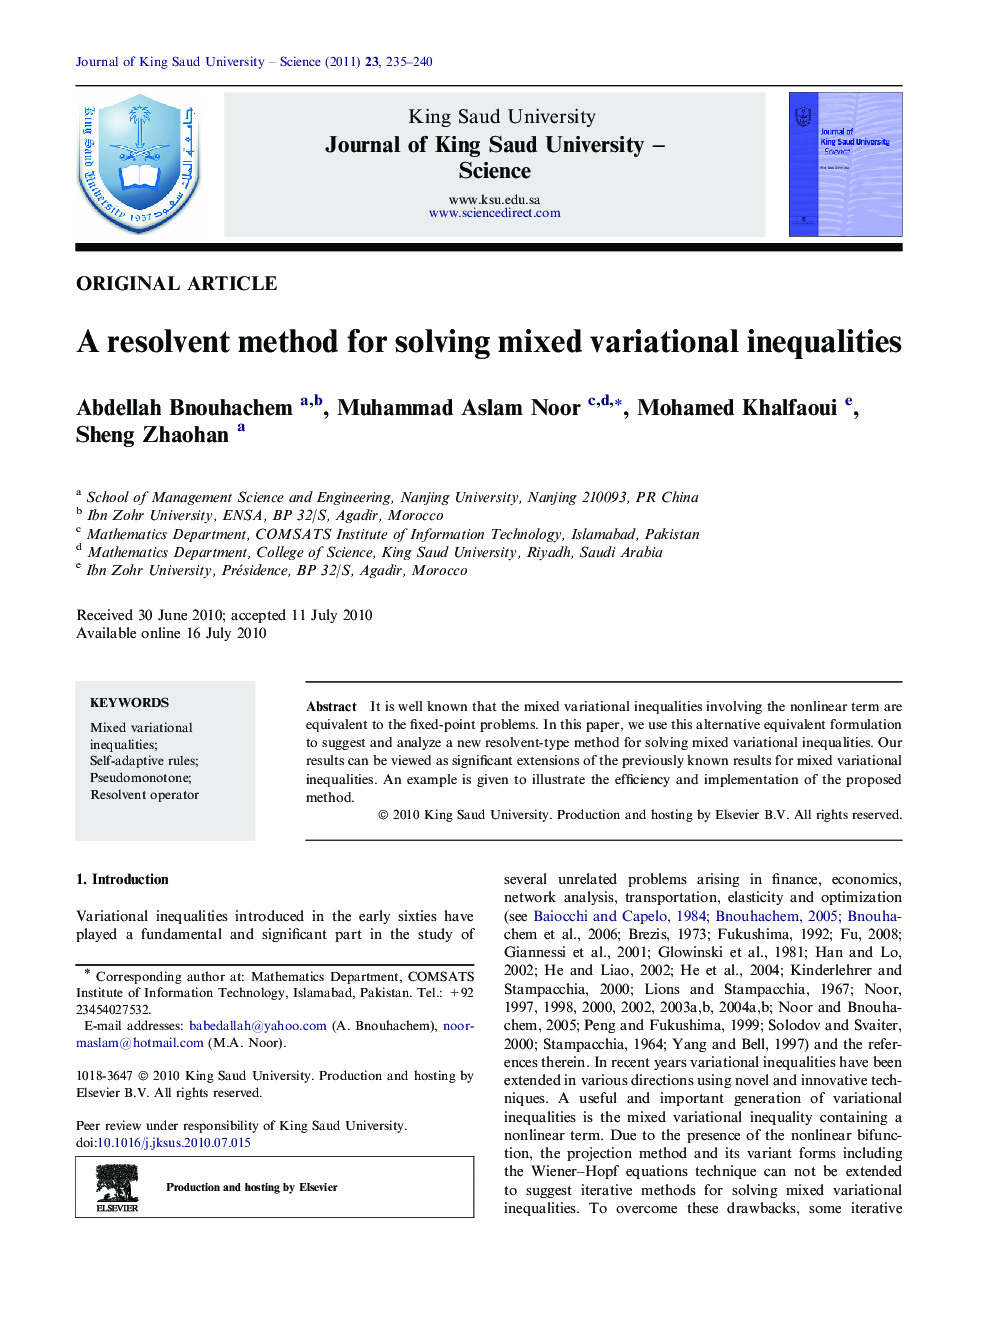 A resolvent method for solving mixed variational inequalities 